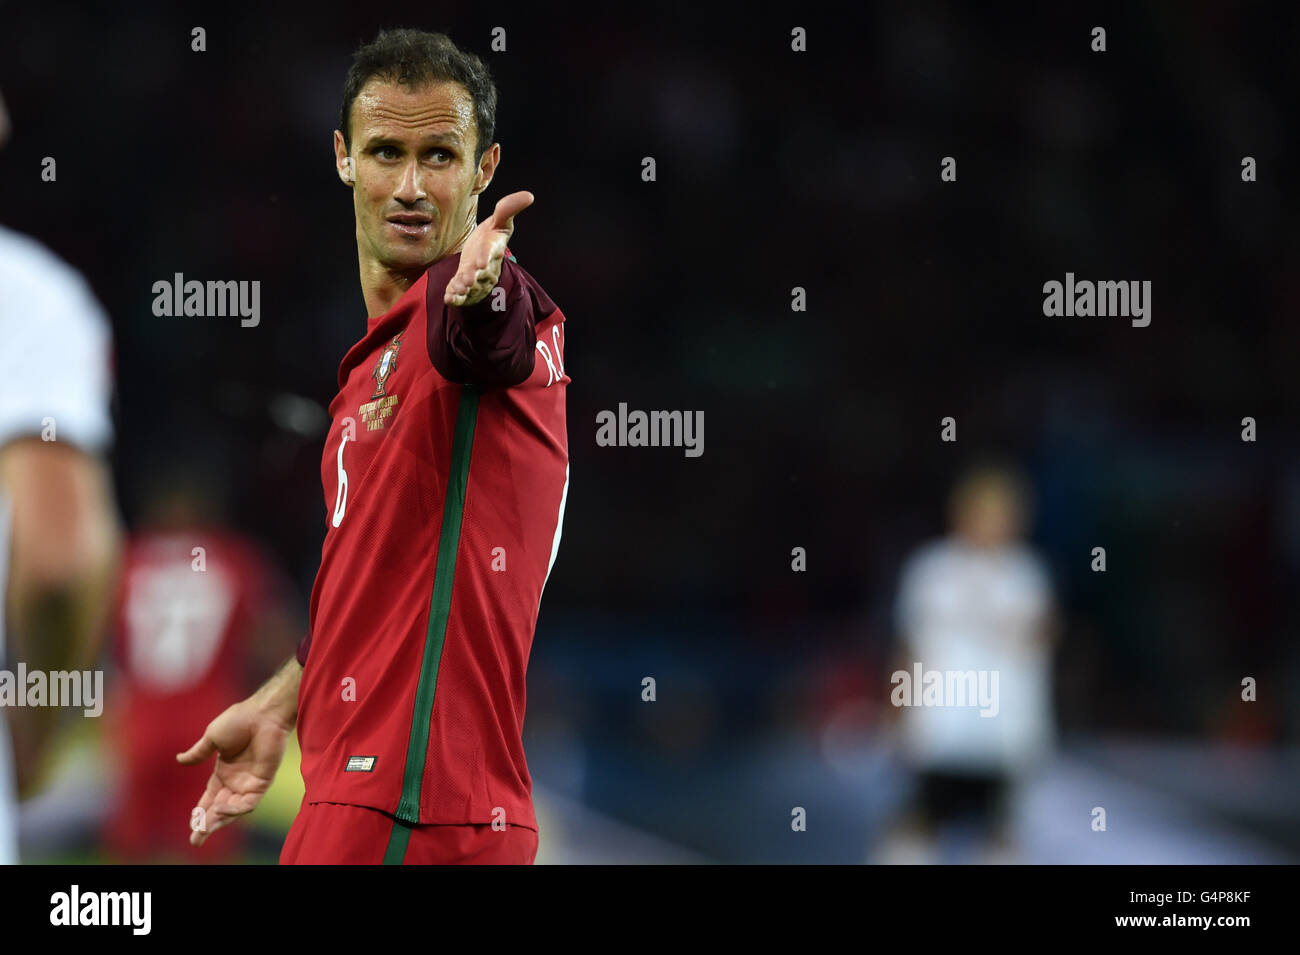 Ricardo Alberto Silveira de Carvalho (Portugal)                              ;  June 18; 2016- Football : Uefa Euro France 2016  Group Stage-MD2 ; Group F, Match 24 ; match between  Portugal 0-0 Austria  at  Stade Parc des Princes ; Paris, France.;         ;( photo by aicfoto)(ITALY) [0855] Stock Photo